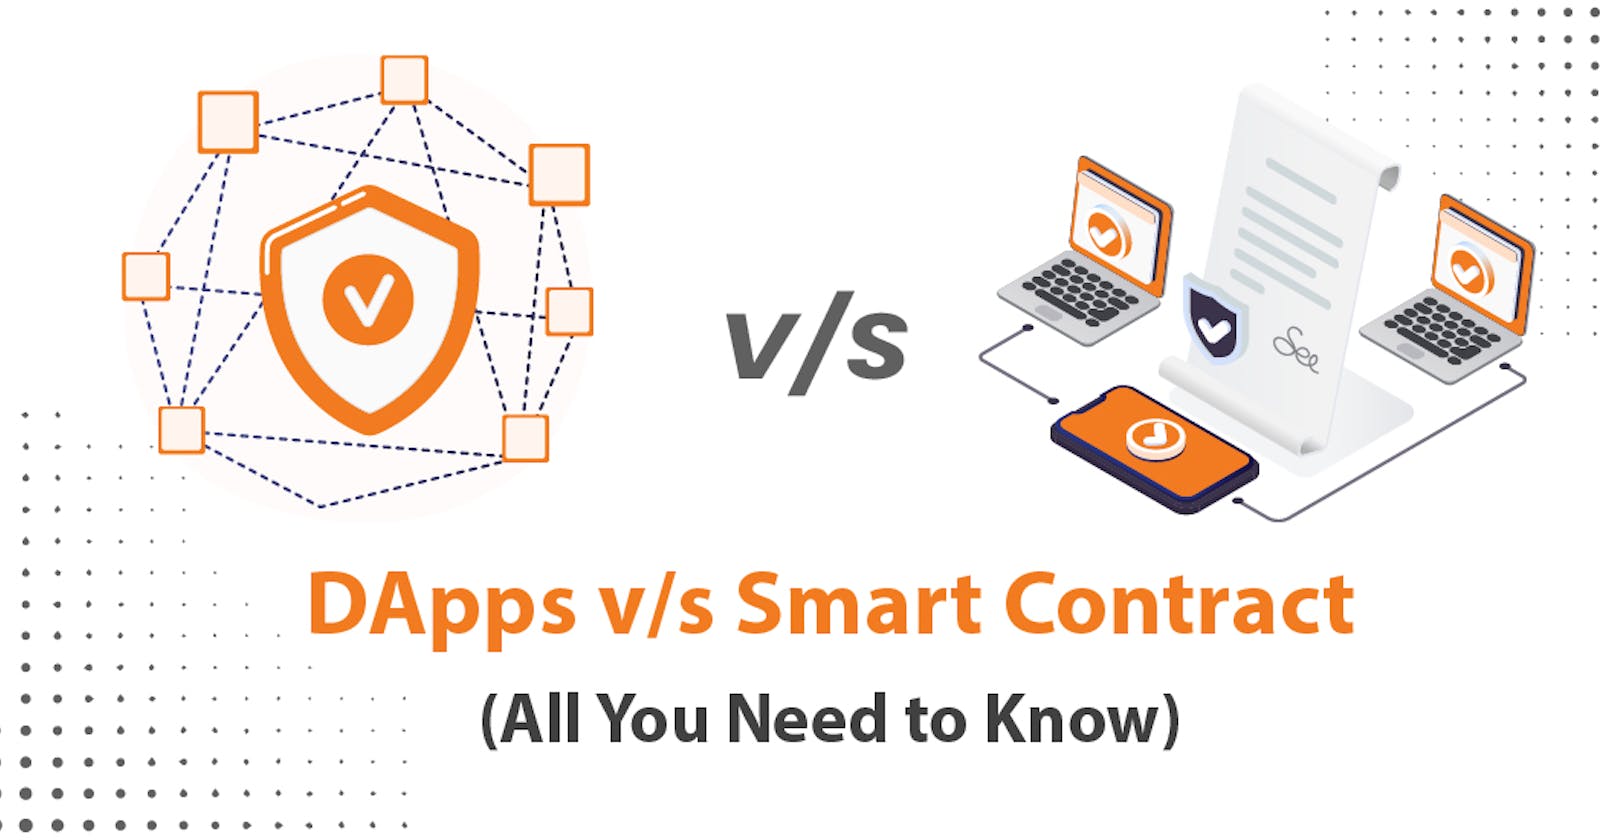 DApps vs. Smart Contracts: All You Need to Know